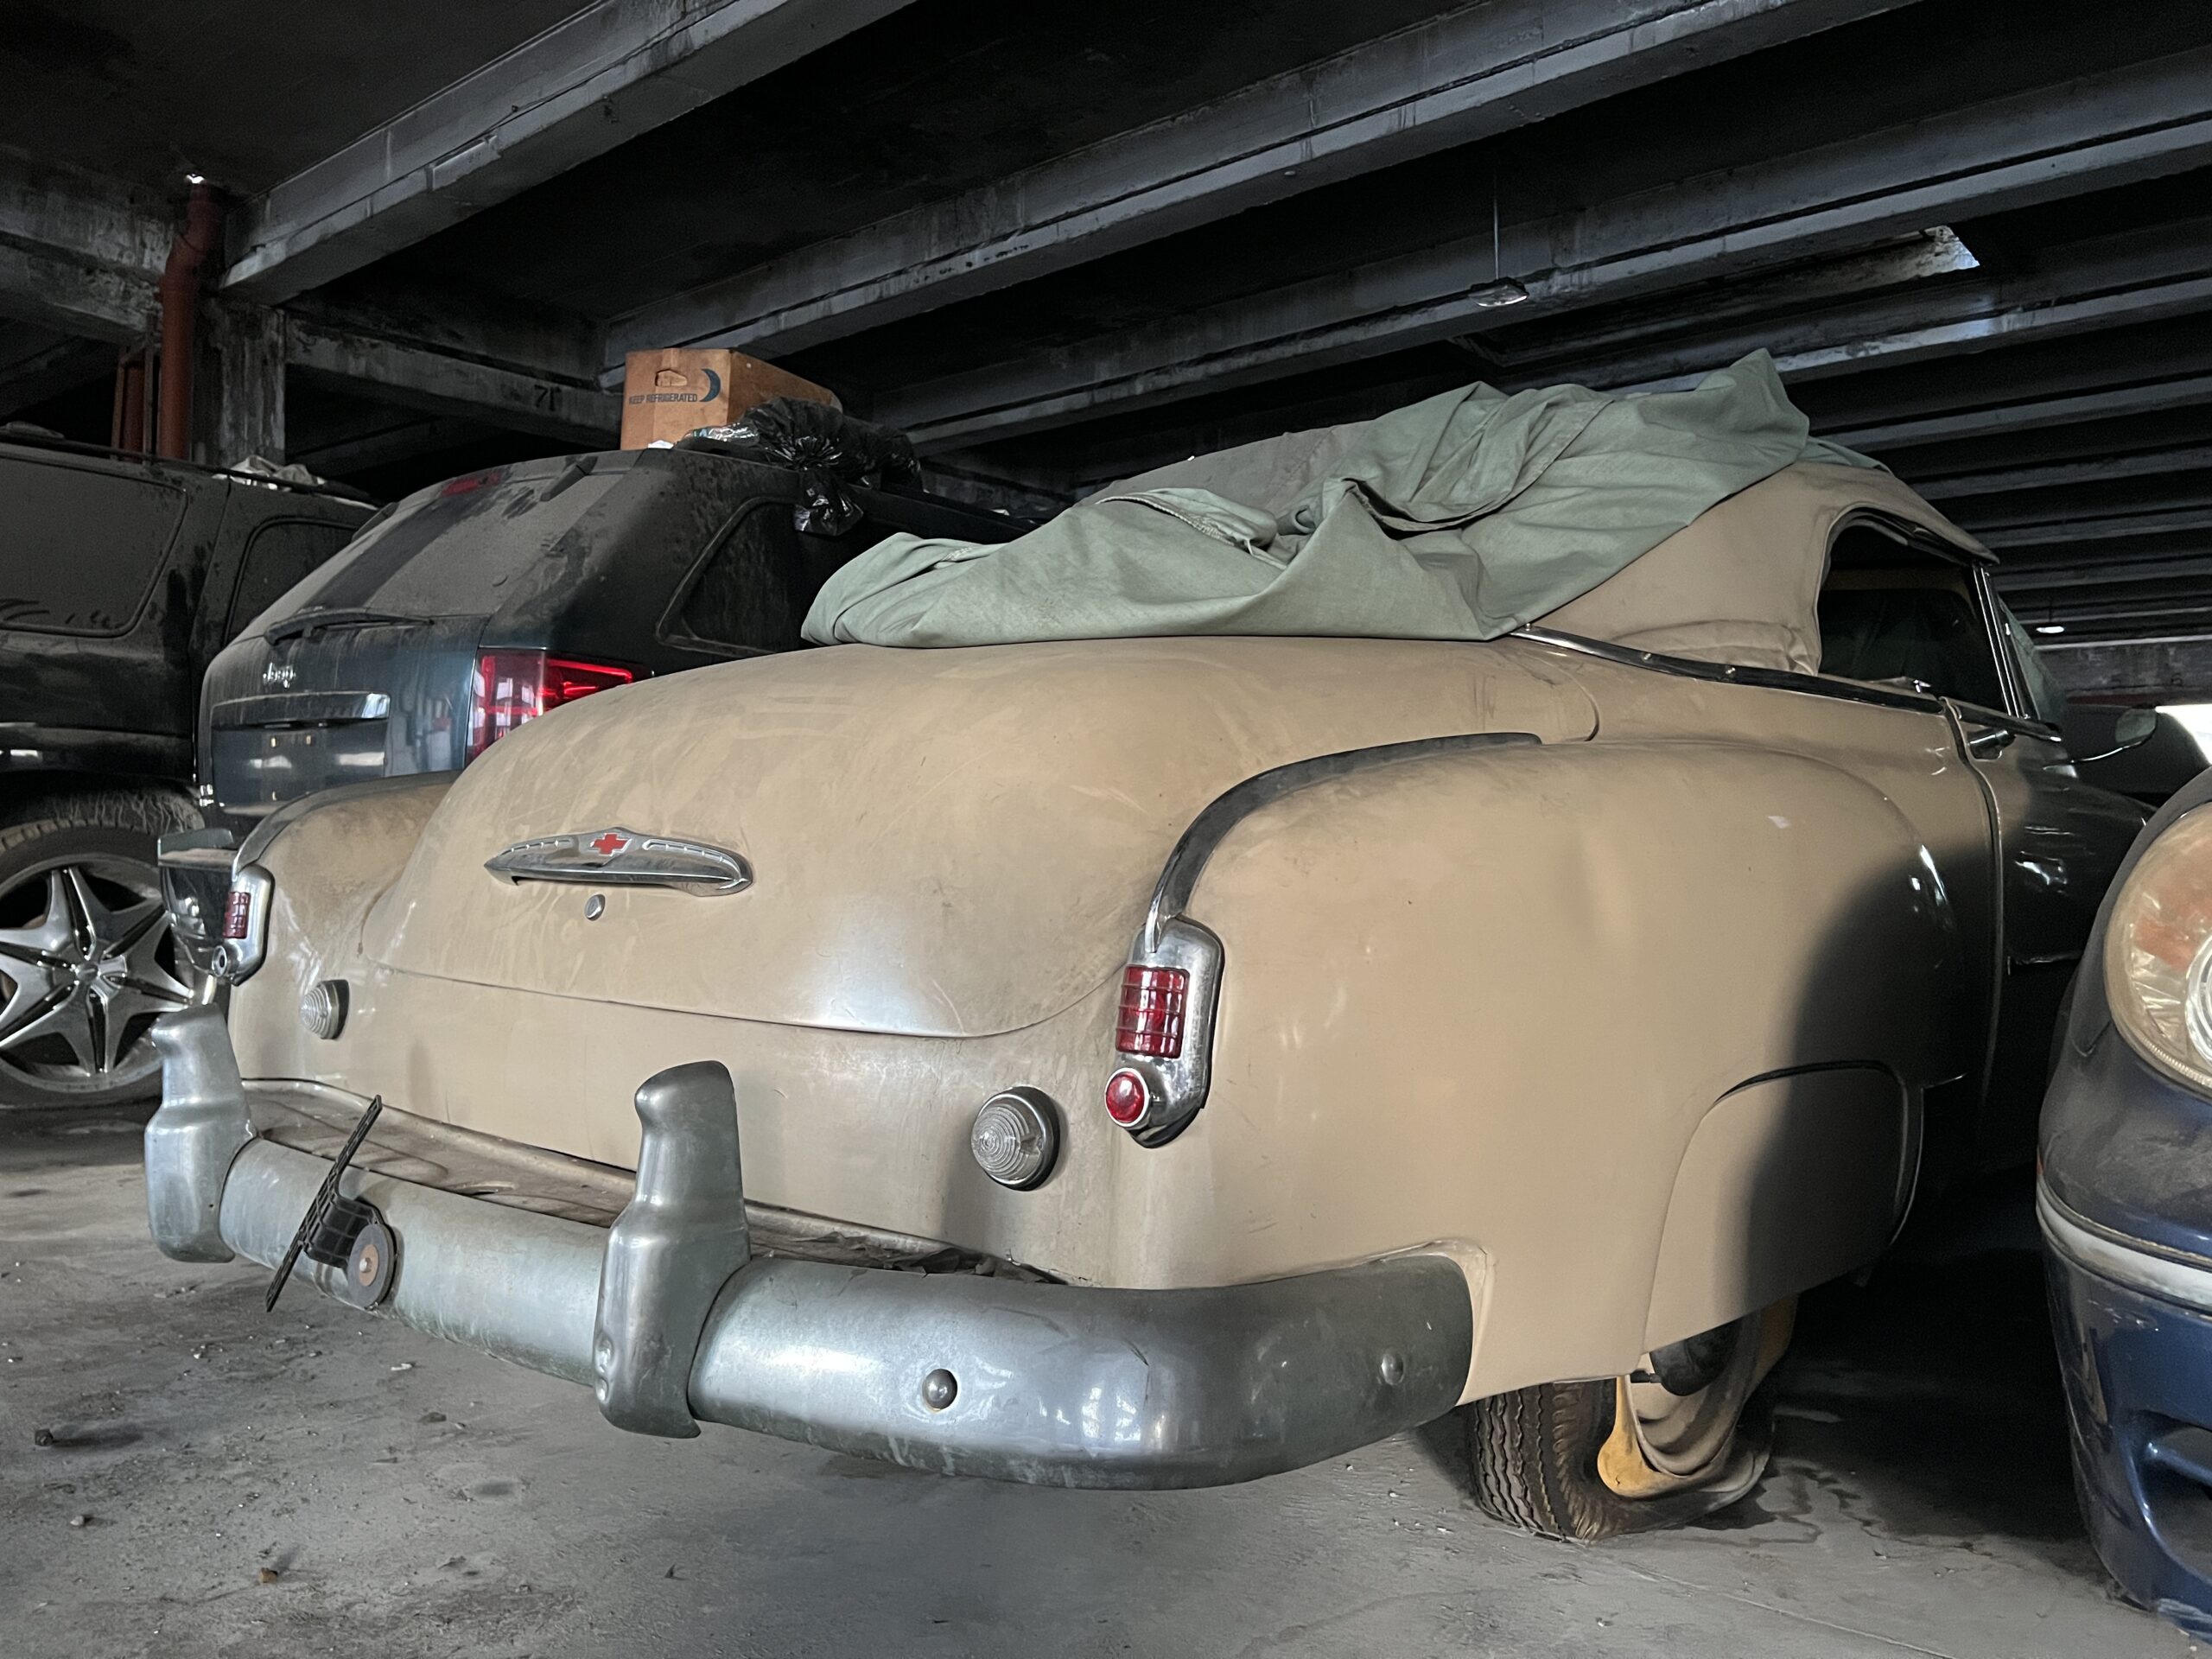 Old Car in a Garage Rug by moonfluff